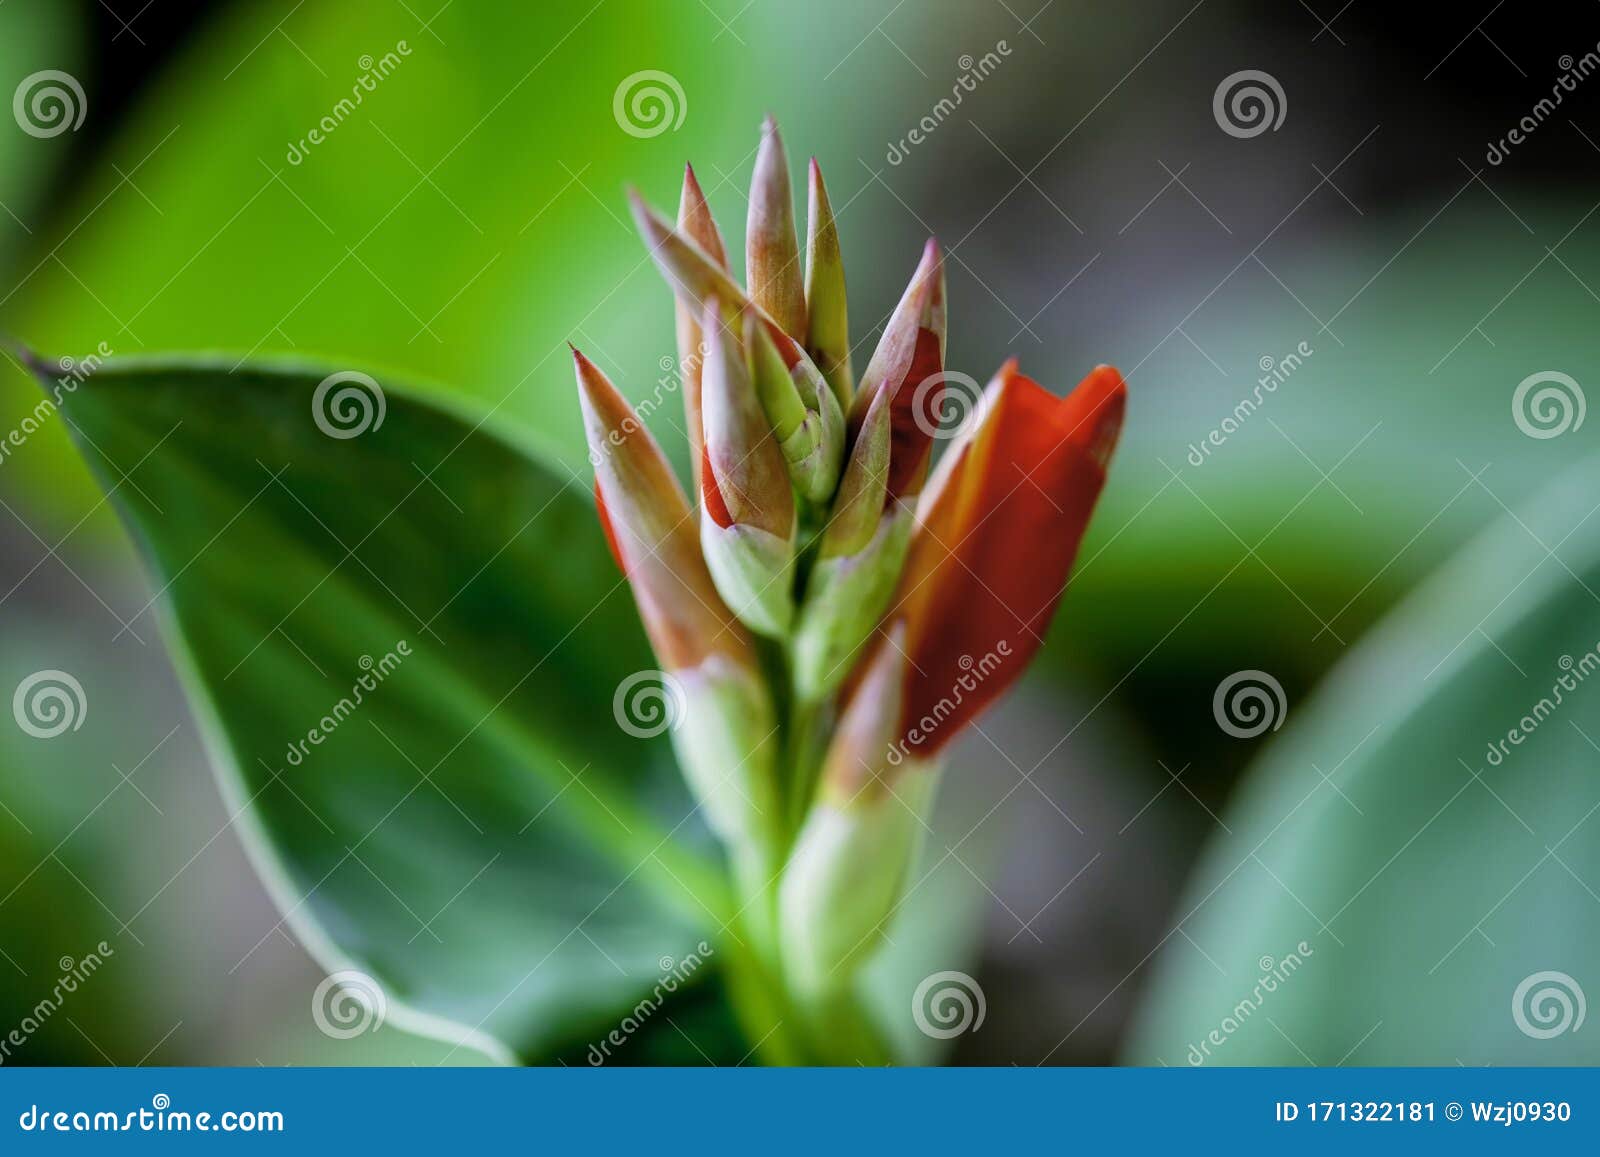 A Bunch Of Closeup Red Canna Lily Flower Buds Stock Image Image Of Blooms Accumulation 171322181